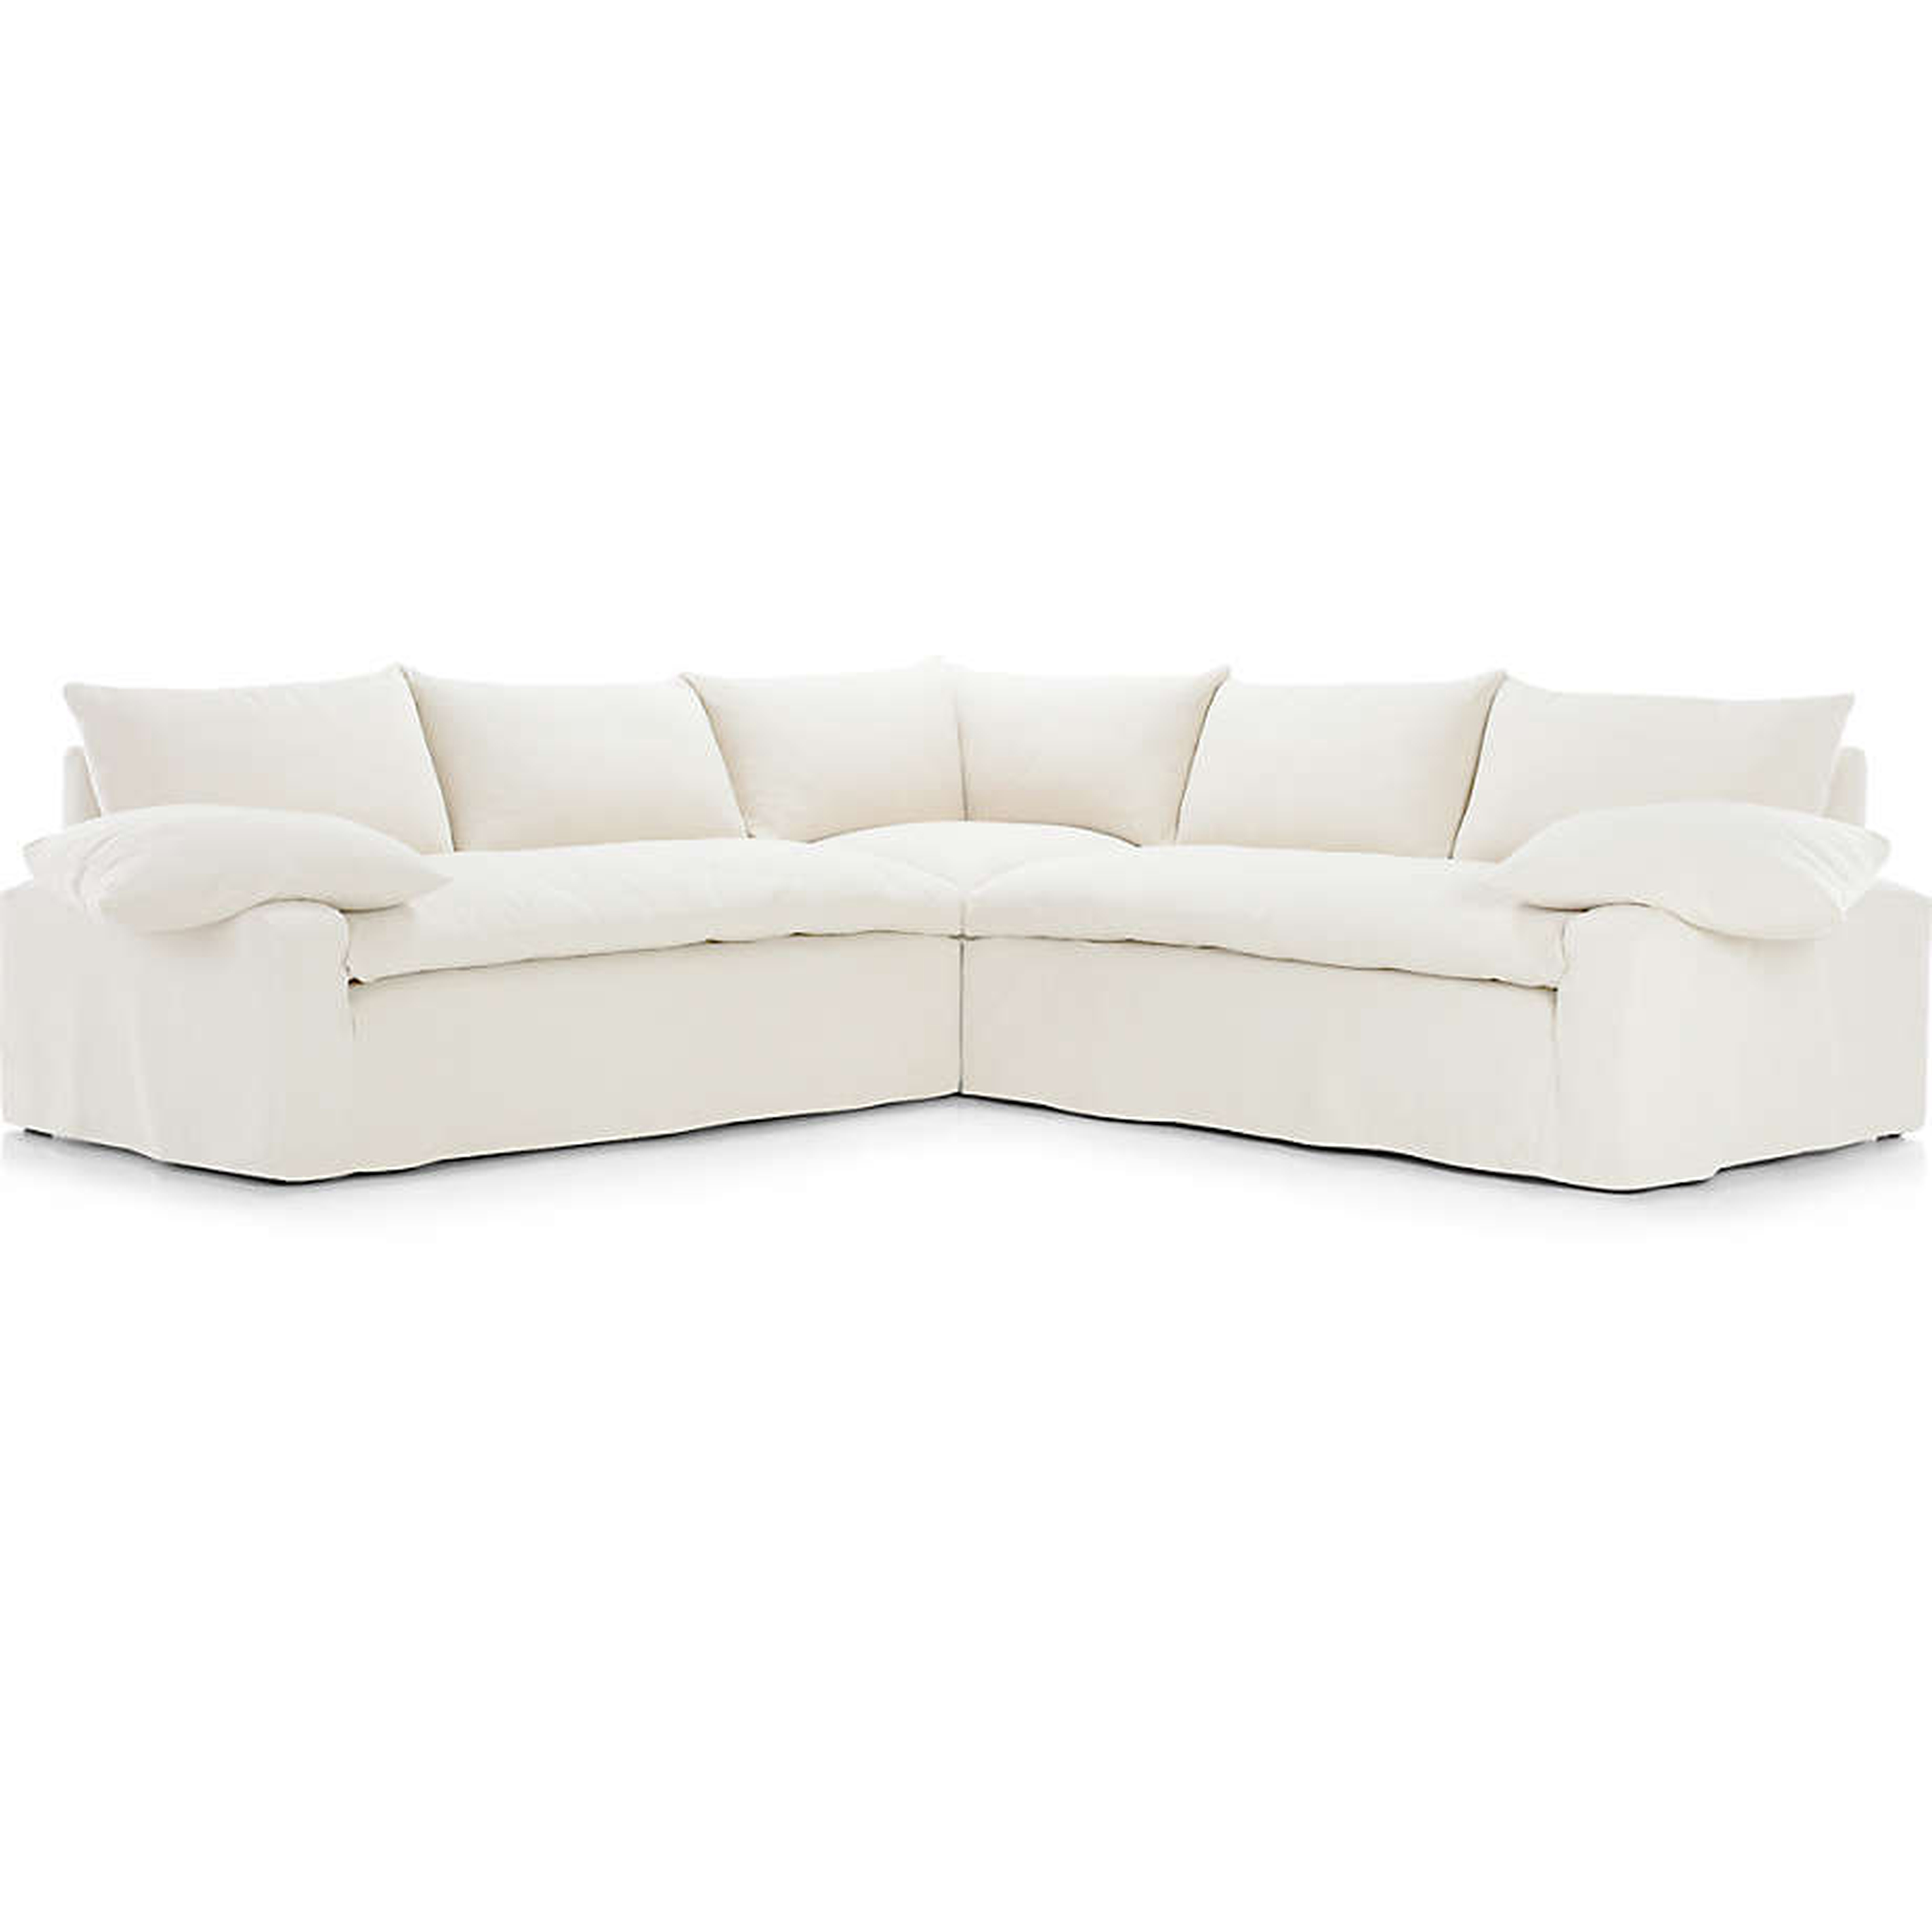 Ever Slipcovered 3-Piece Sectional Sofa by Leanne Ford - Crate and Barrel